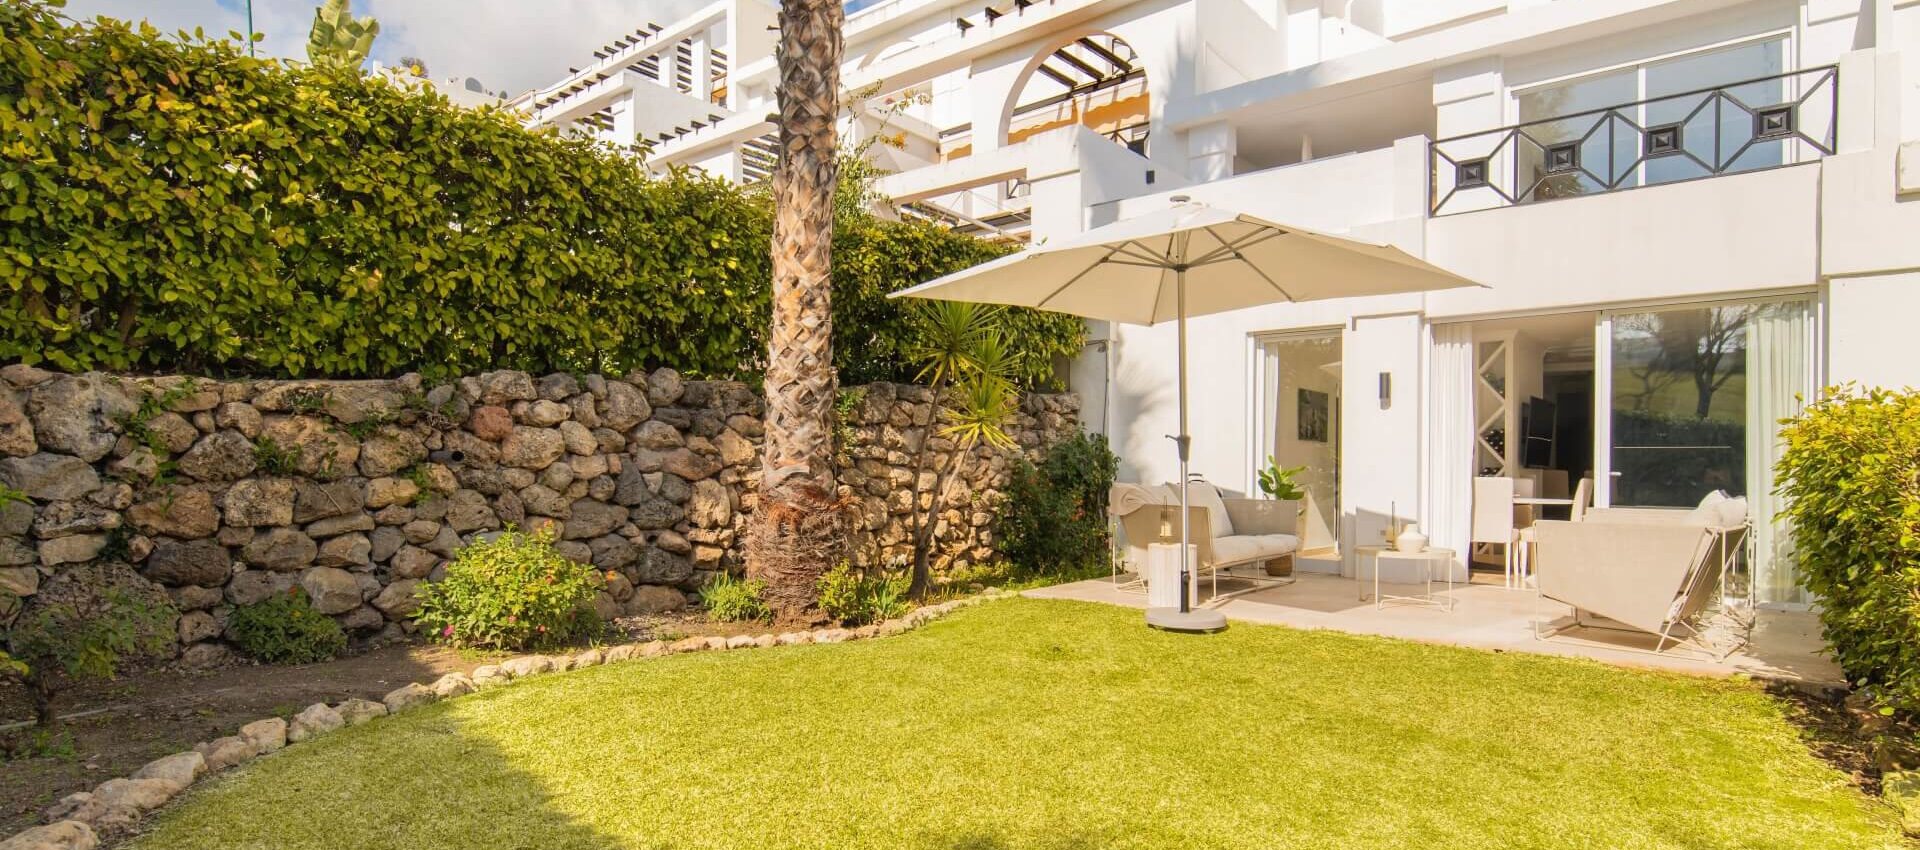 Excellent top quality garden apartment in La Quinta with frontline golf views